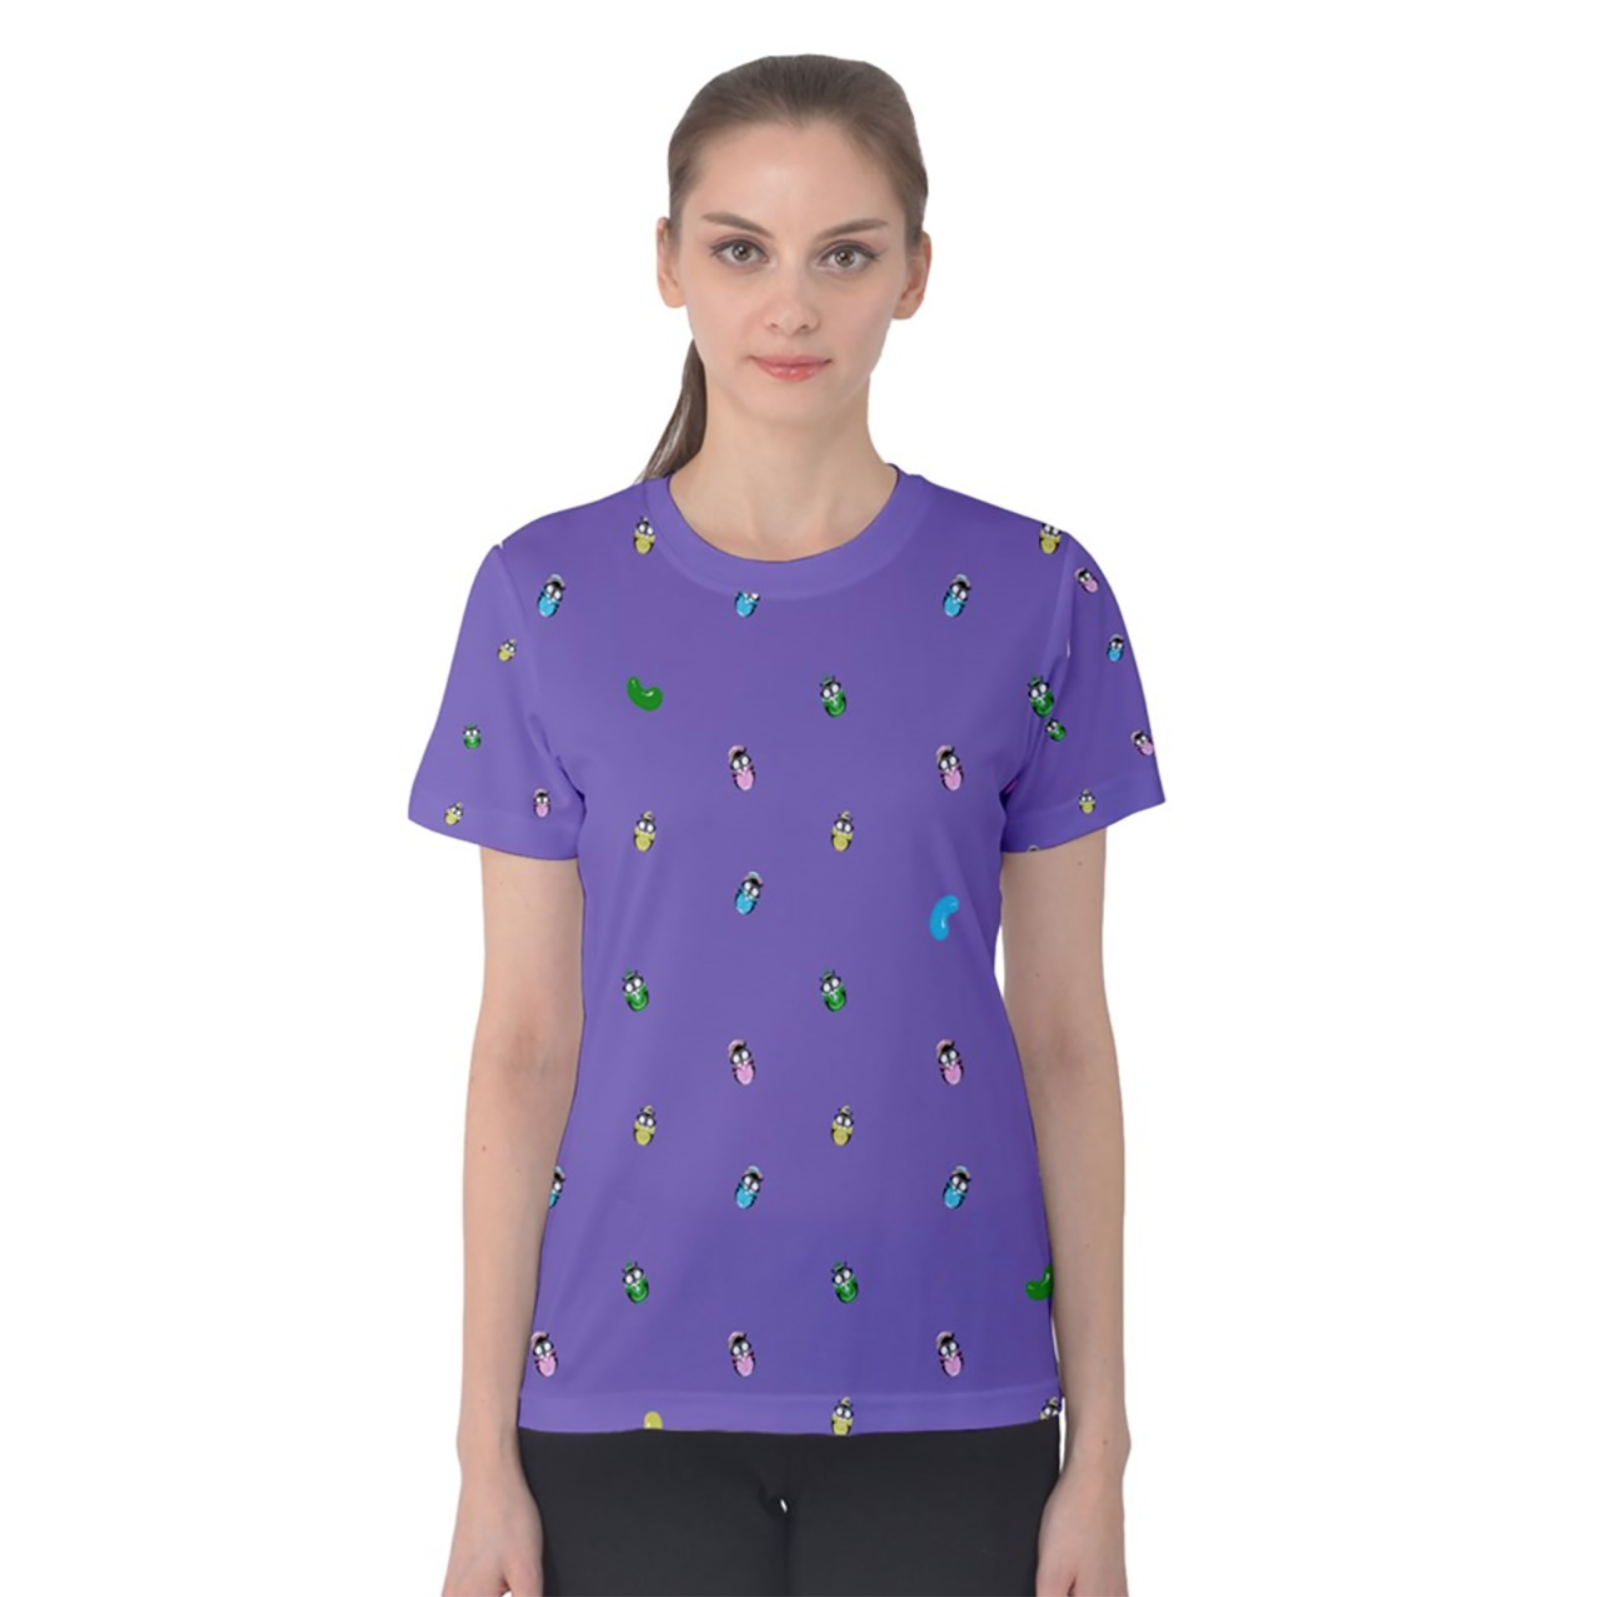 Easter Egg Women's Cotton Tee (Small Pattern)